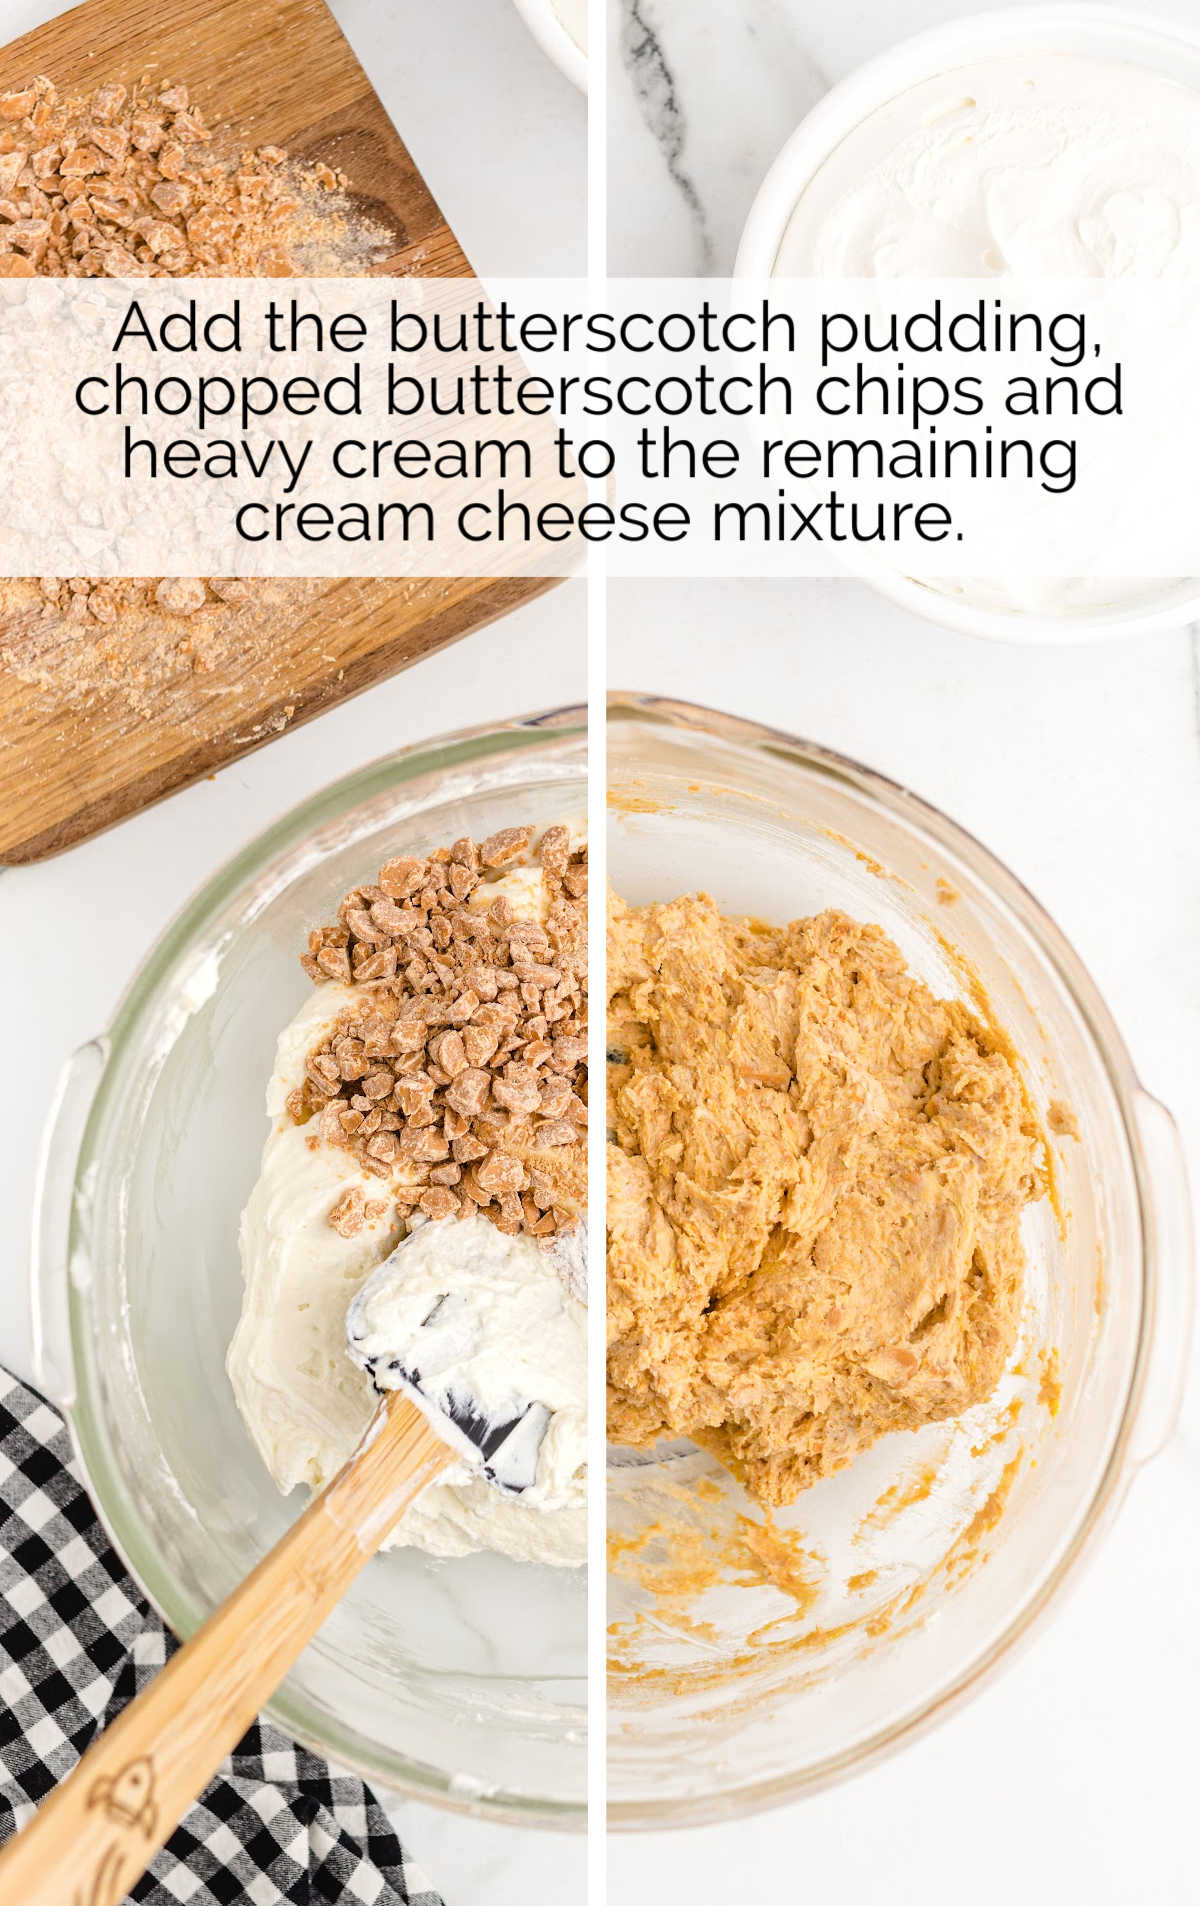 butterscotch pudding, butterscotch chips, and heavy cream added to the cream cheese mixture